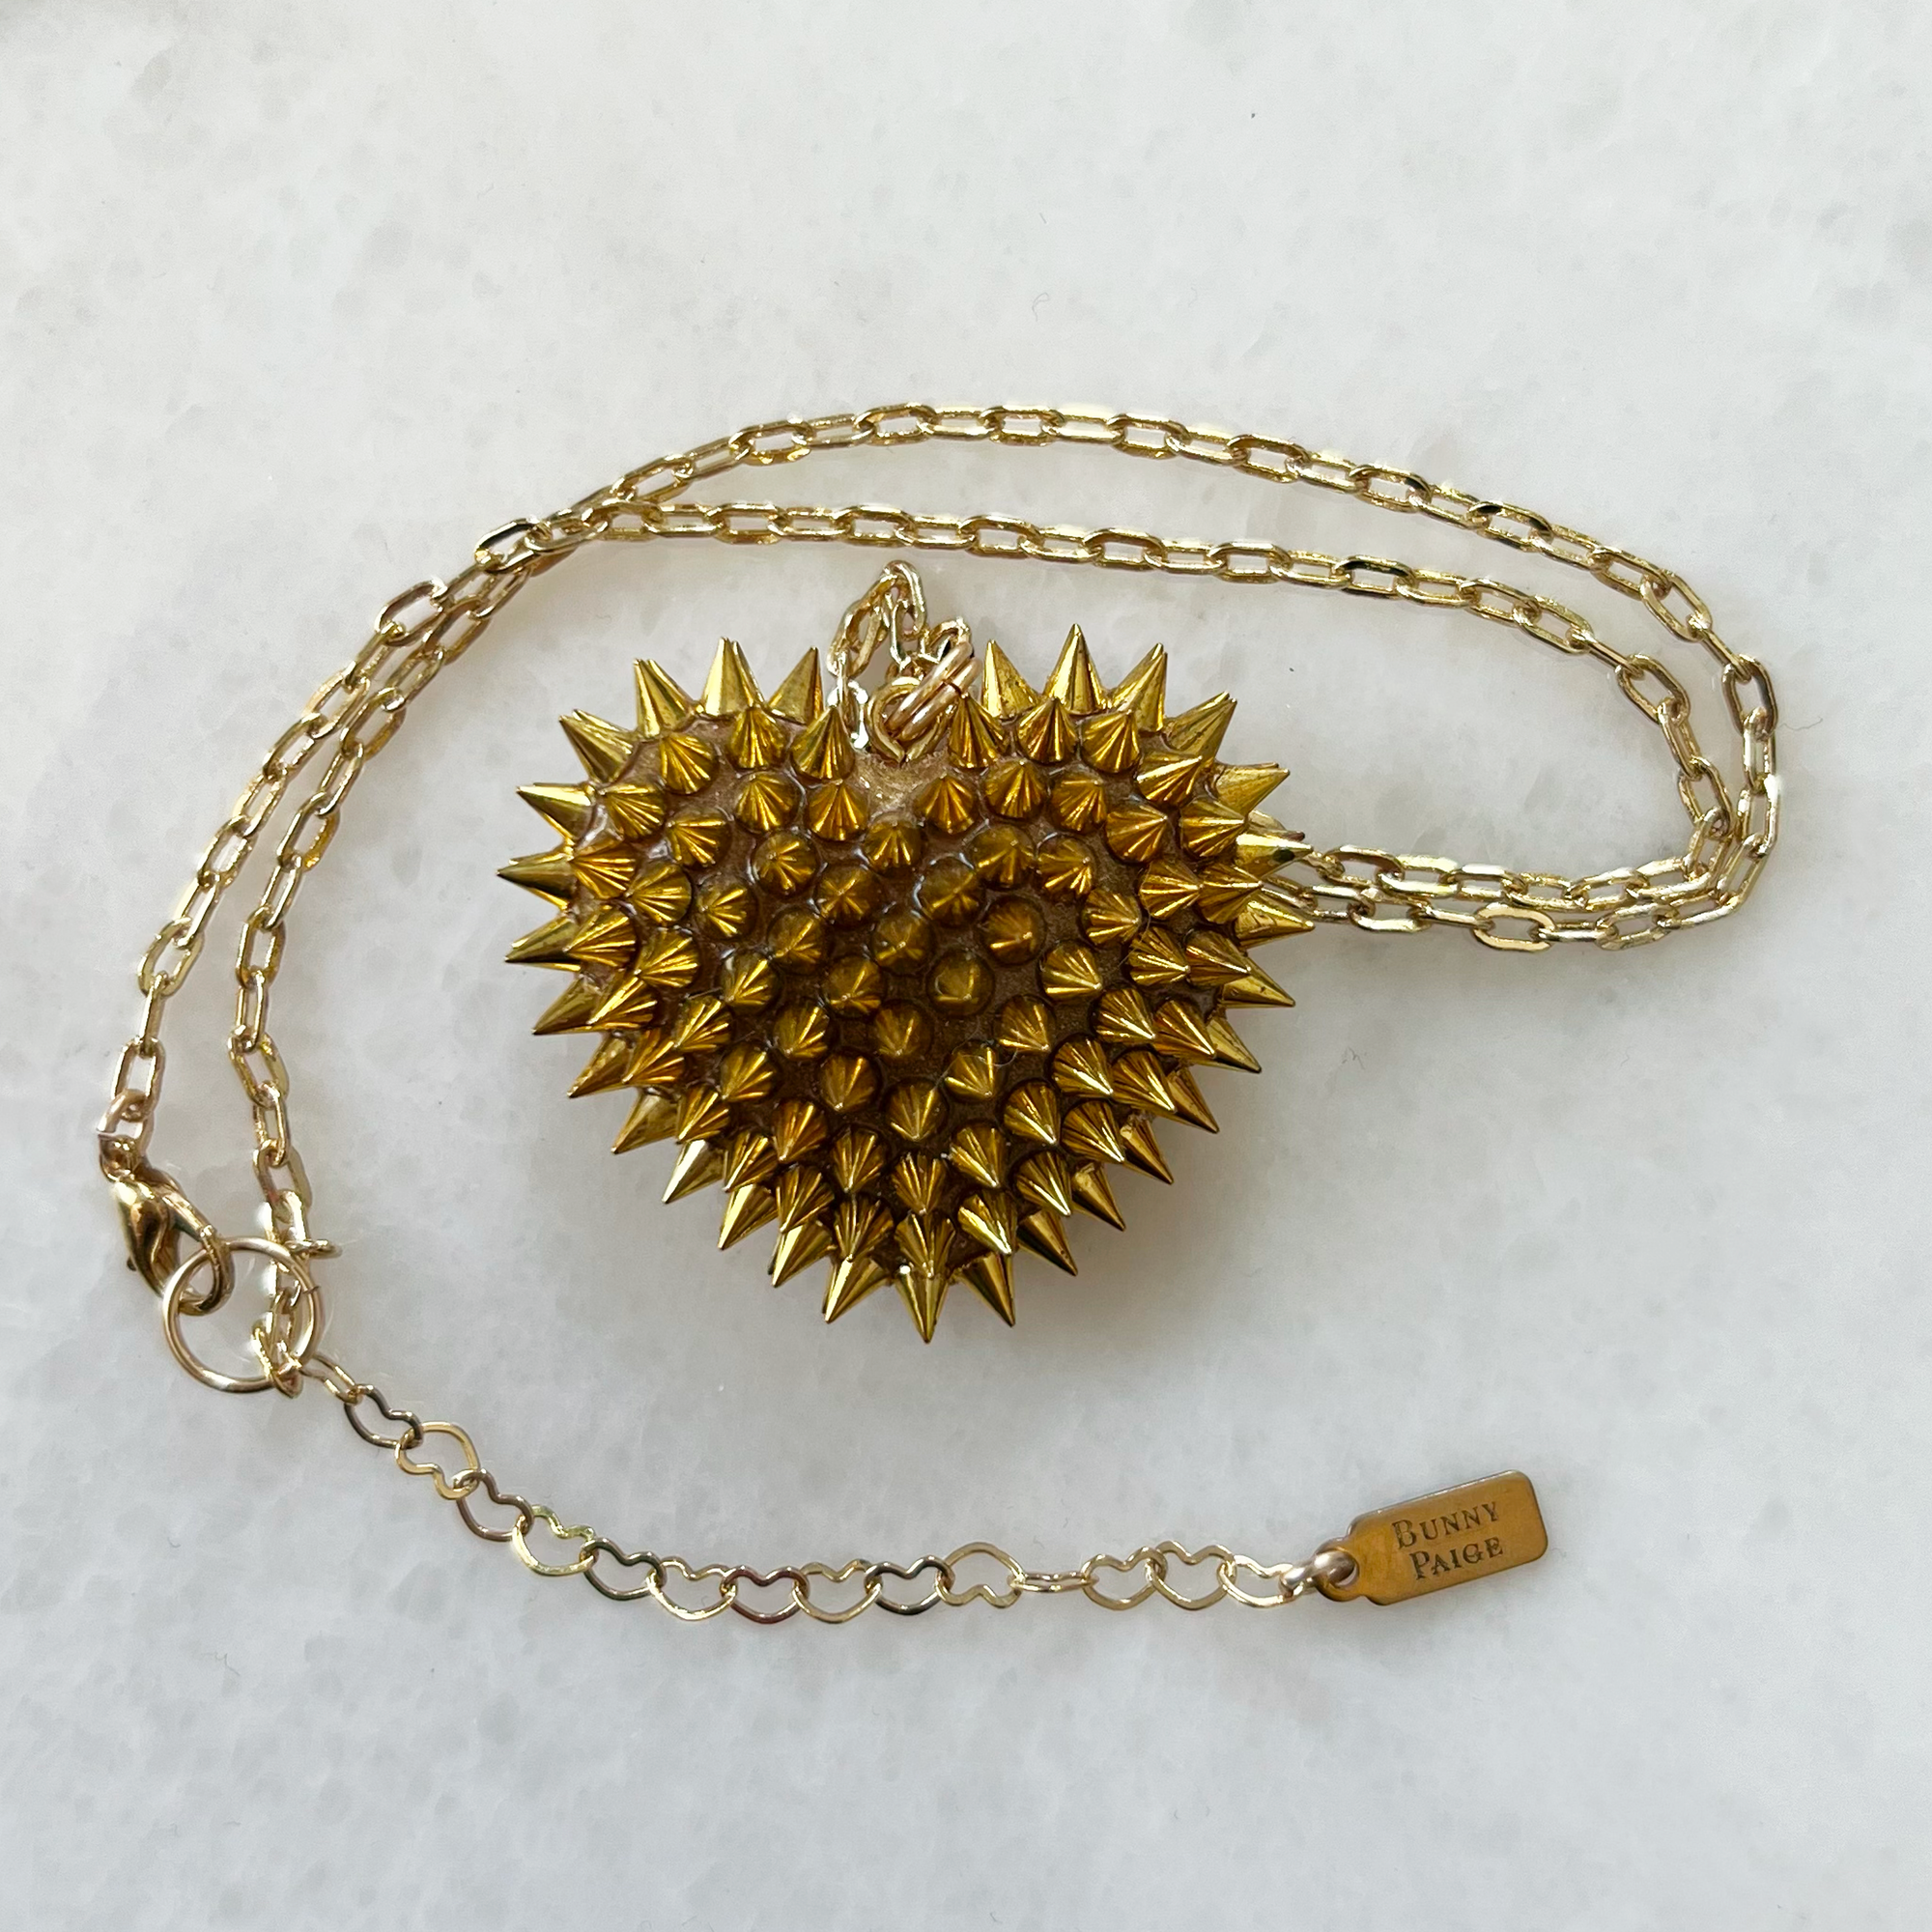 Mini Spiked Heart | Gold ✨𝗥𝗘𝗔𝗗𝗬 𝗧𝗢 𝗦𝗛𝗜𝗣✨